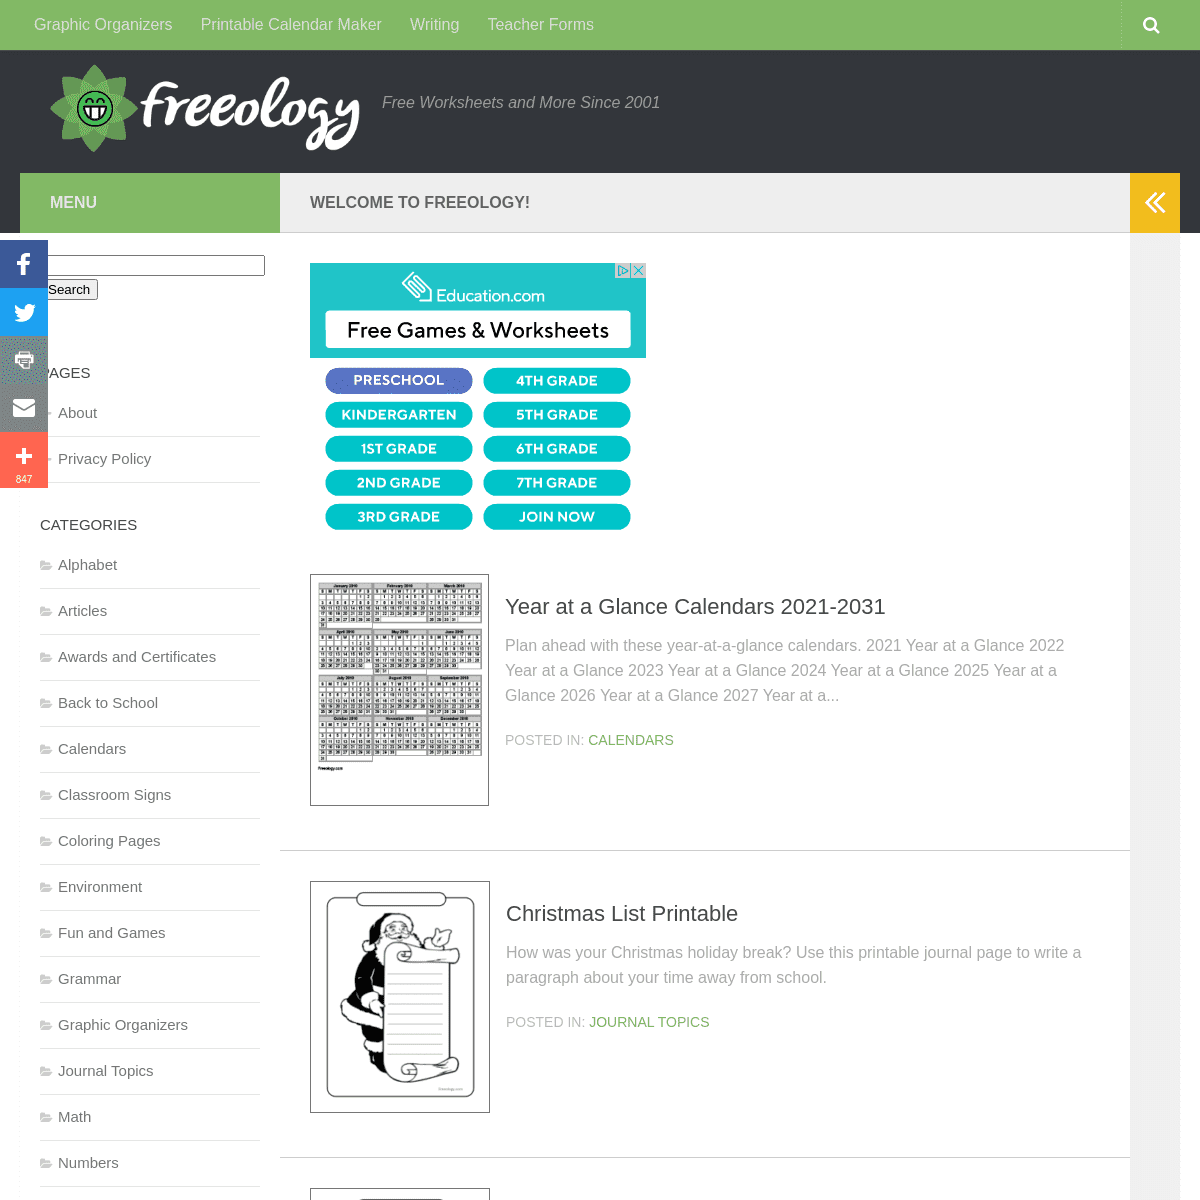 A complete backup of https://freeology.com